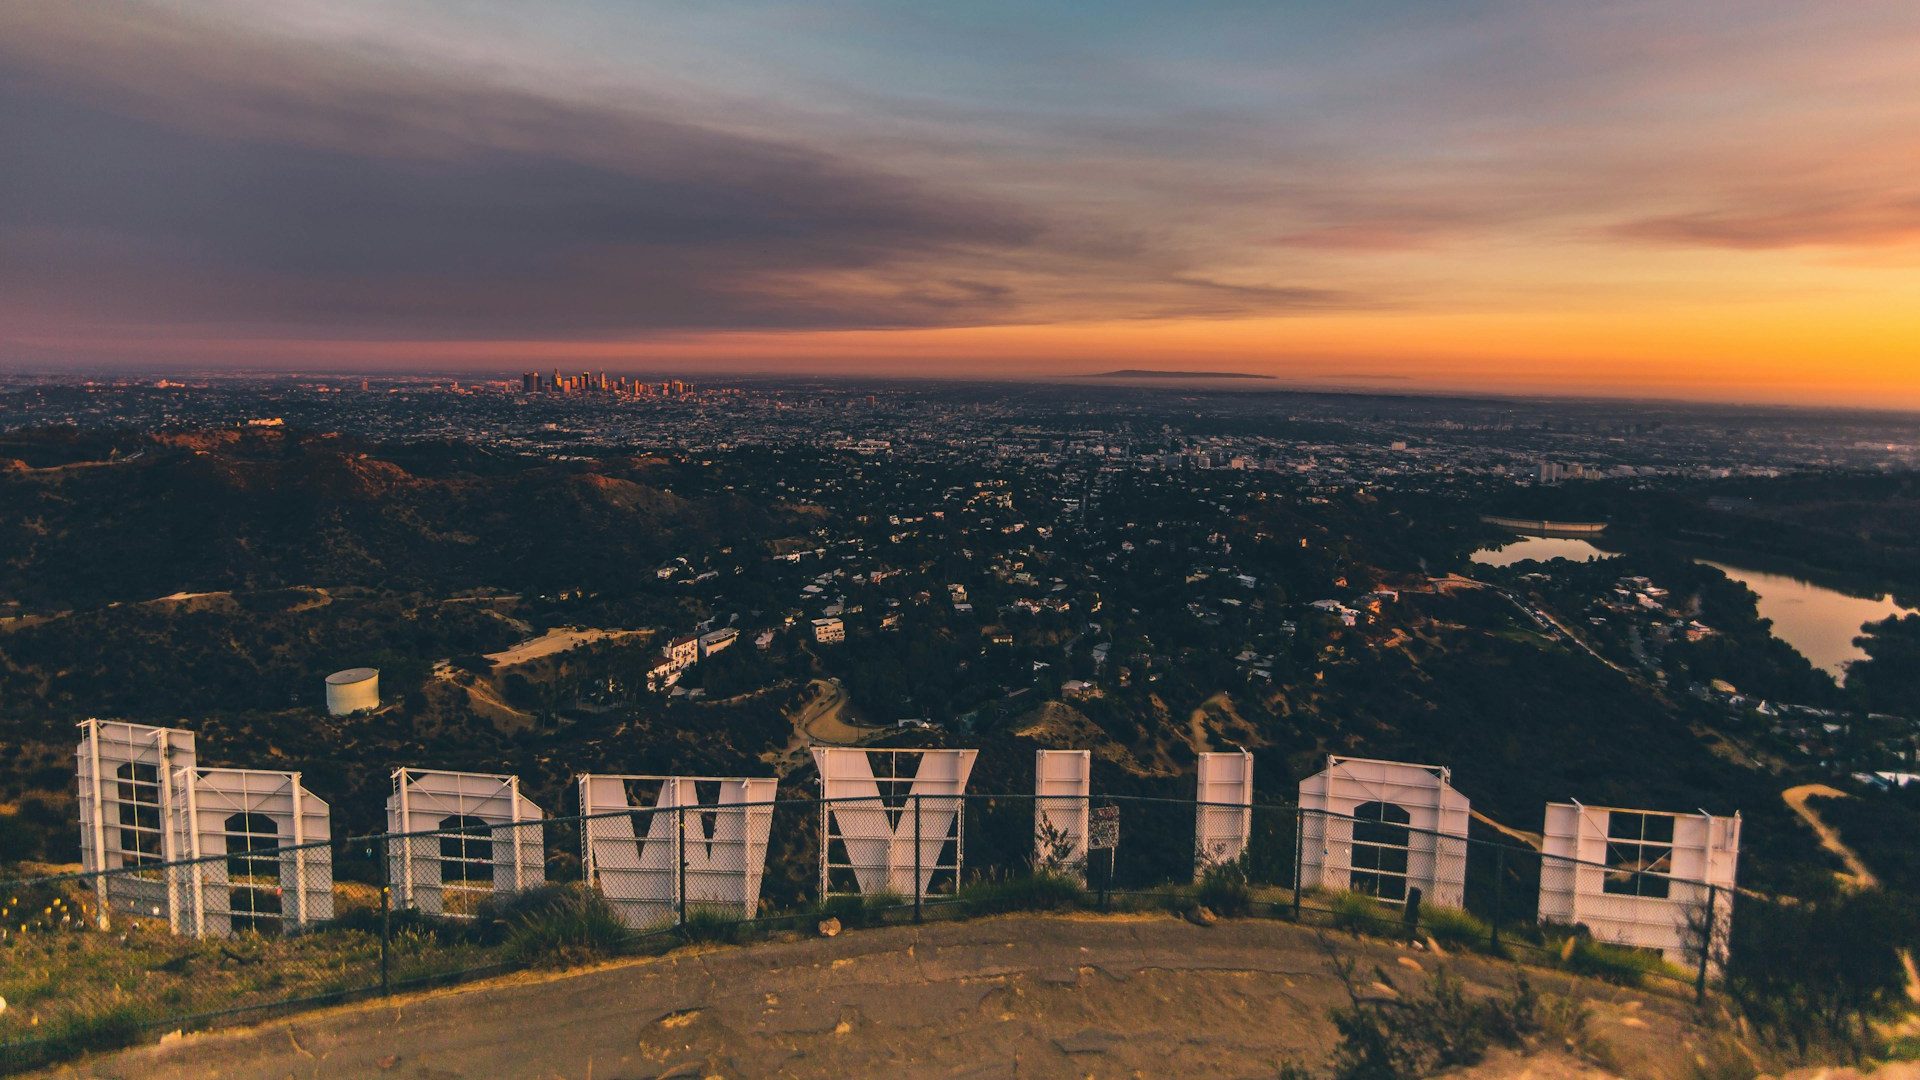 Top 5 Things to do When Stoned in L.A